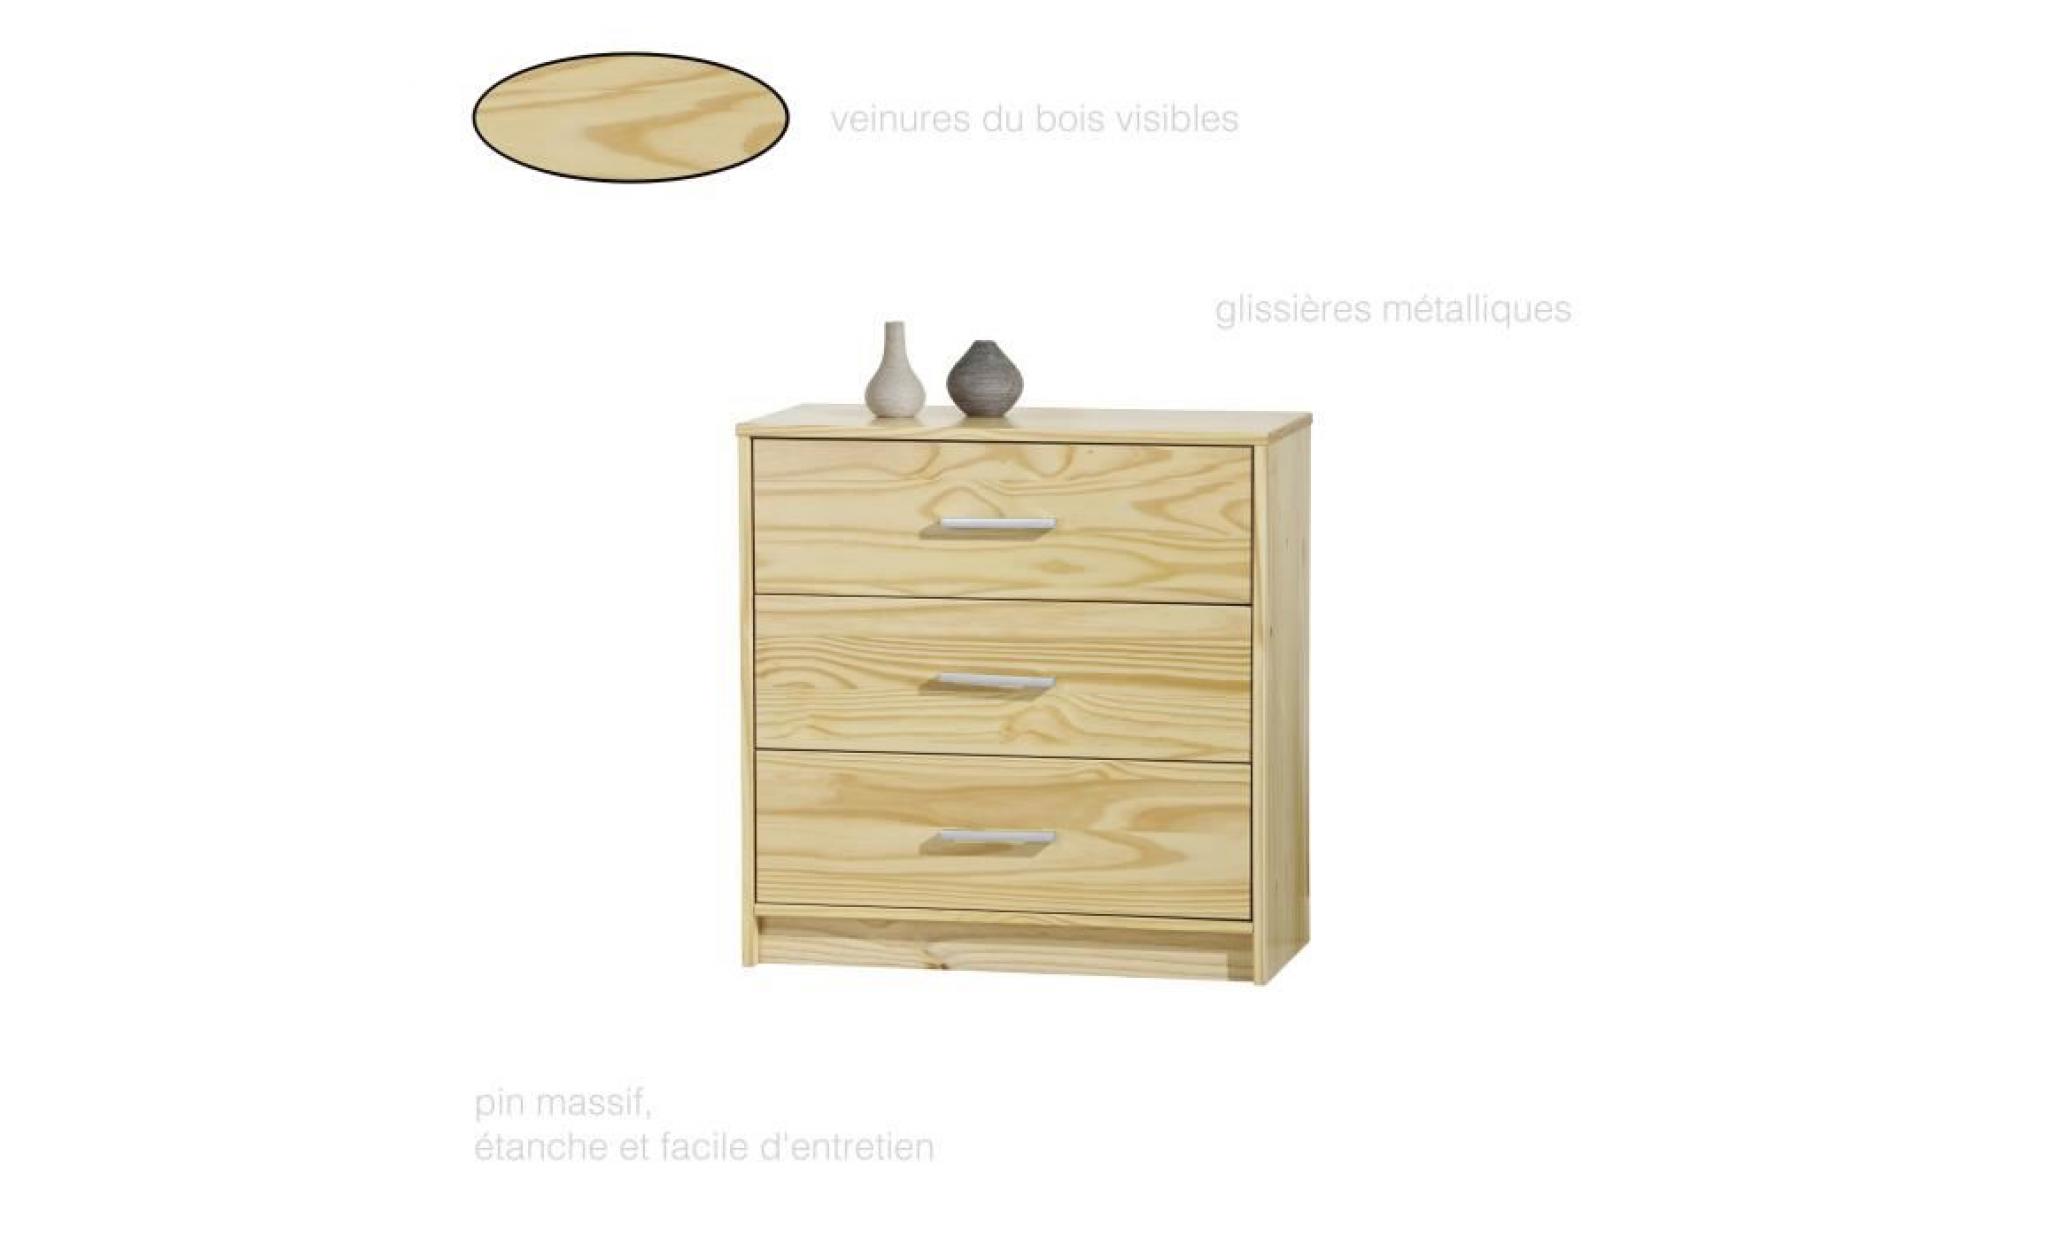 commode moderne 3 tiroirs, commode en pin massif naturel, commode chambre, commode rangement, commode chambre adulte, commode large